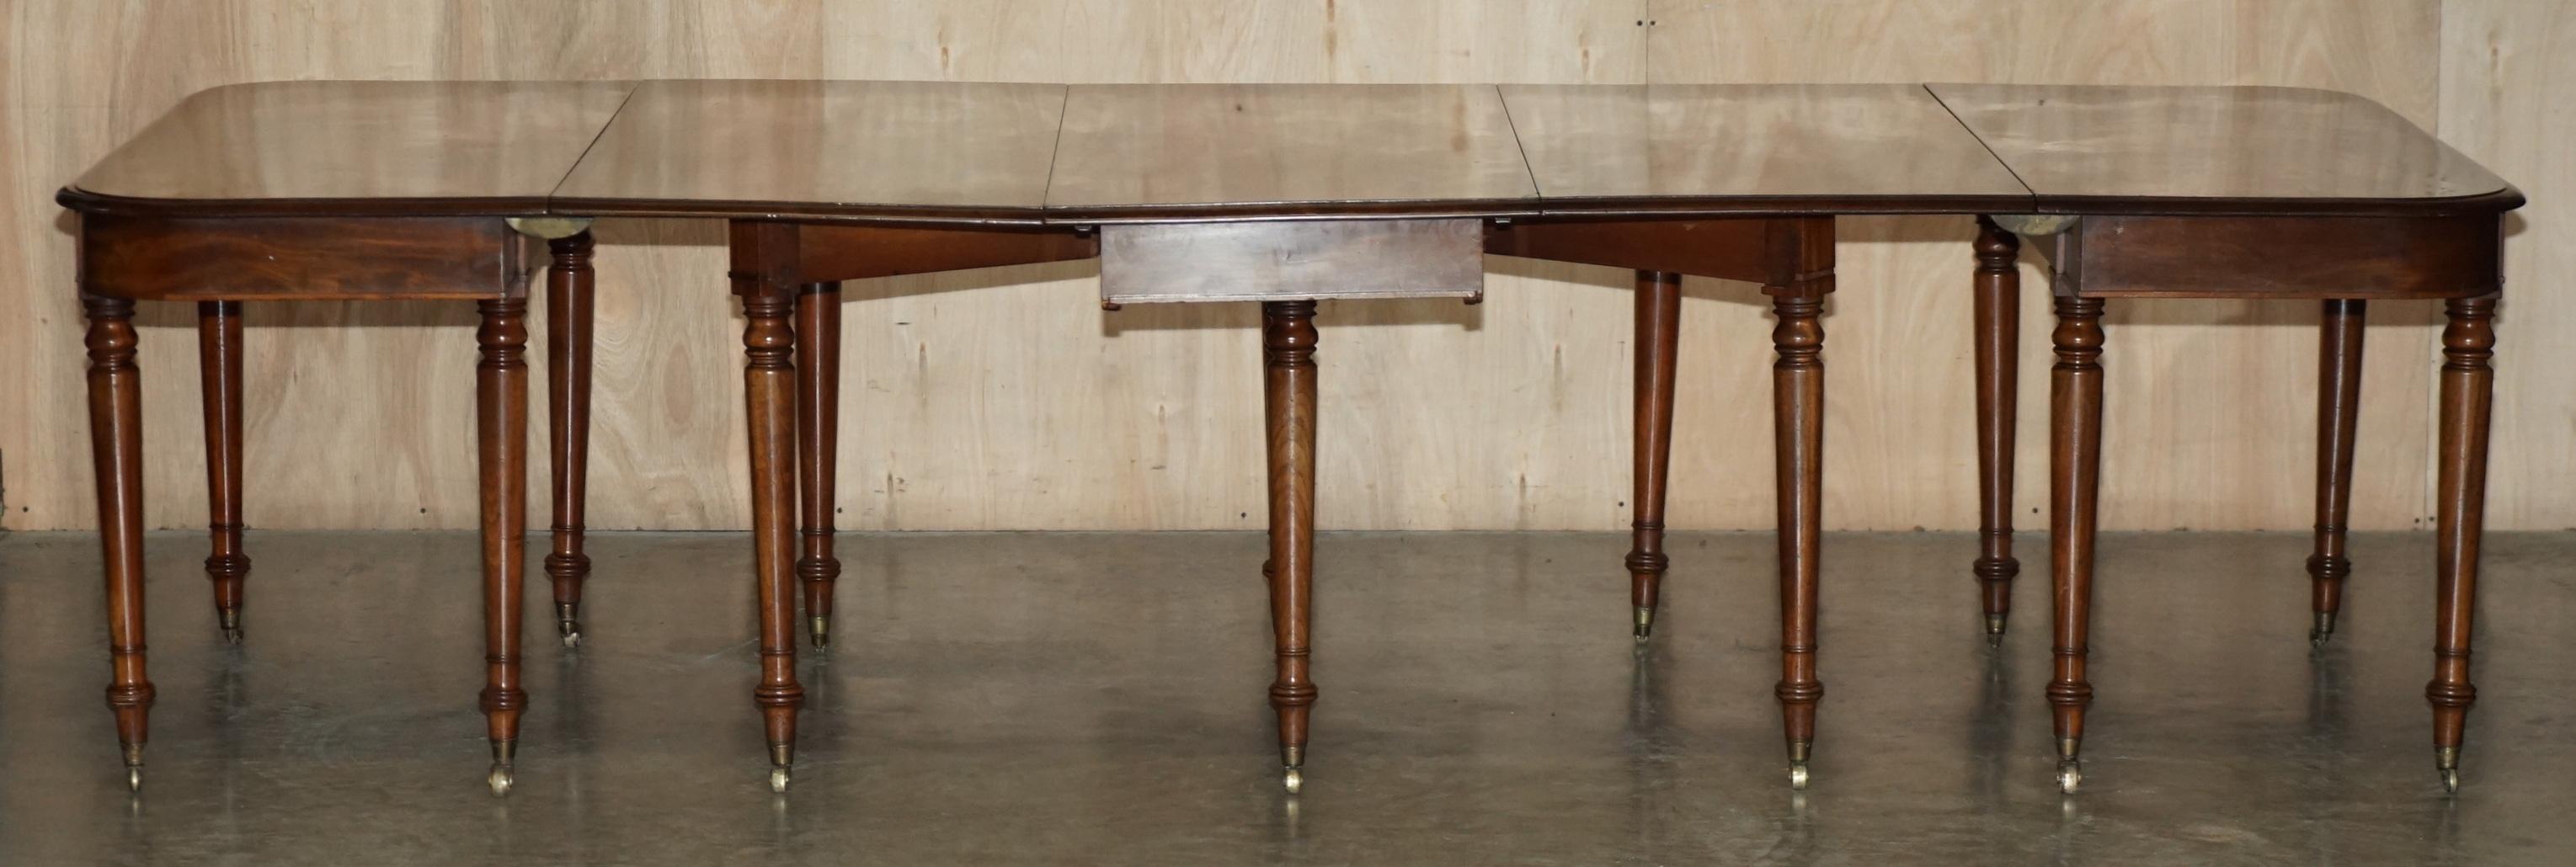 Antique George III 1820 Flamed Hardwood Fully Restored Extending Dining Table For Sale 8